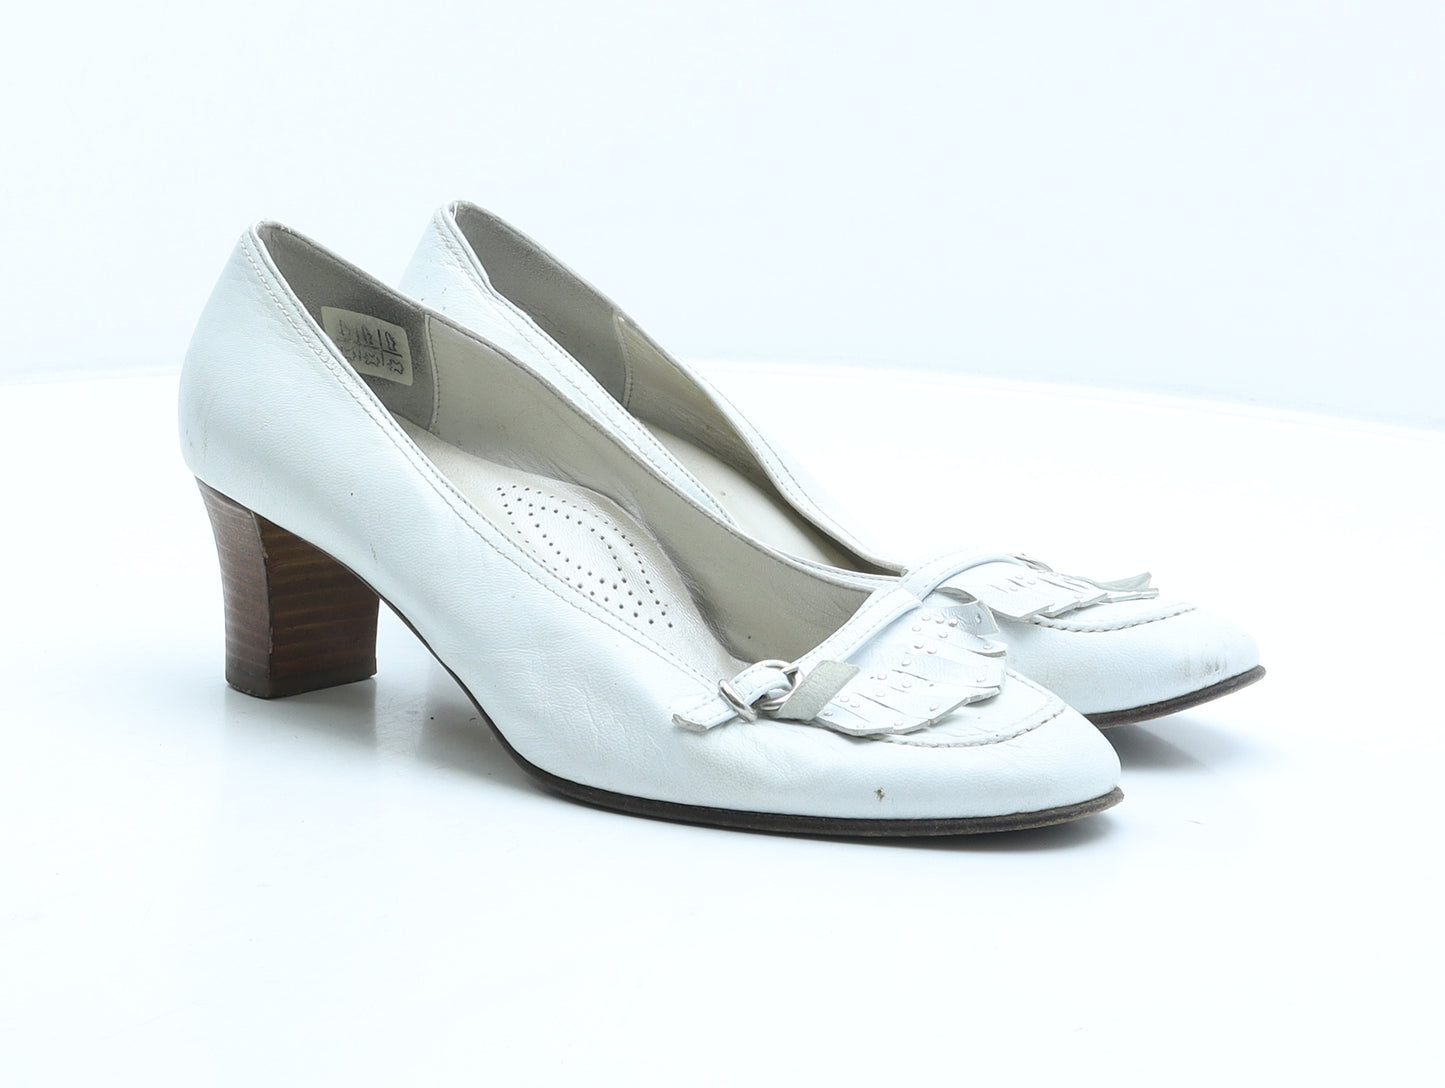 Daniels Womens White Leather Loafer Casual UK 7 40